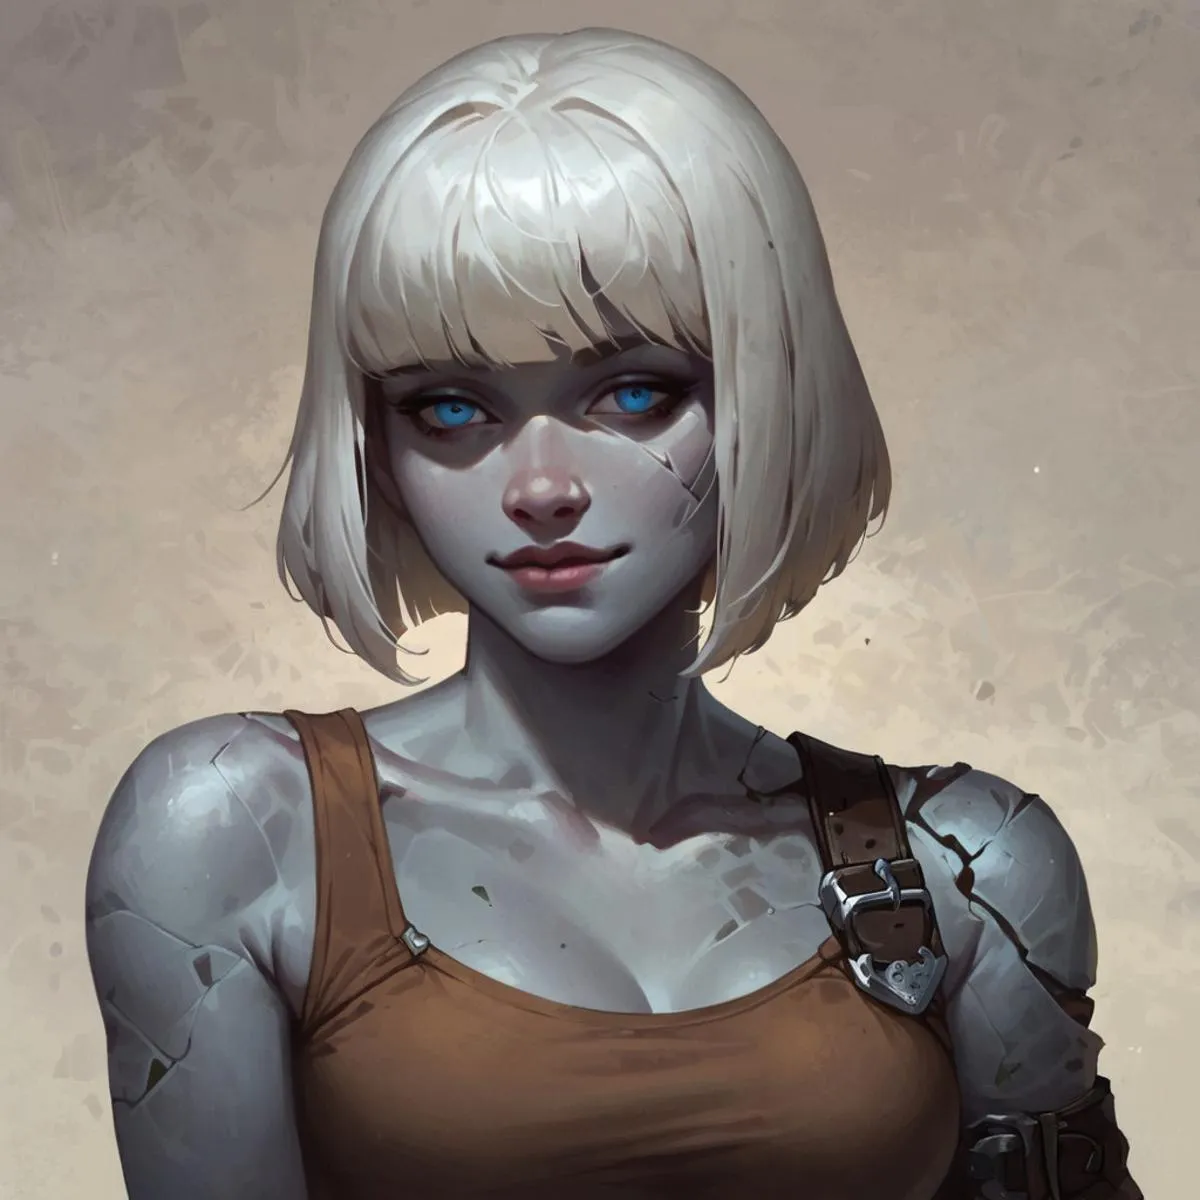 A cyborg girl with blonde hair, blue eyes, and a brown tank top in detailed digital art. This is an AI generated image using stable diffusion.